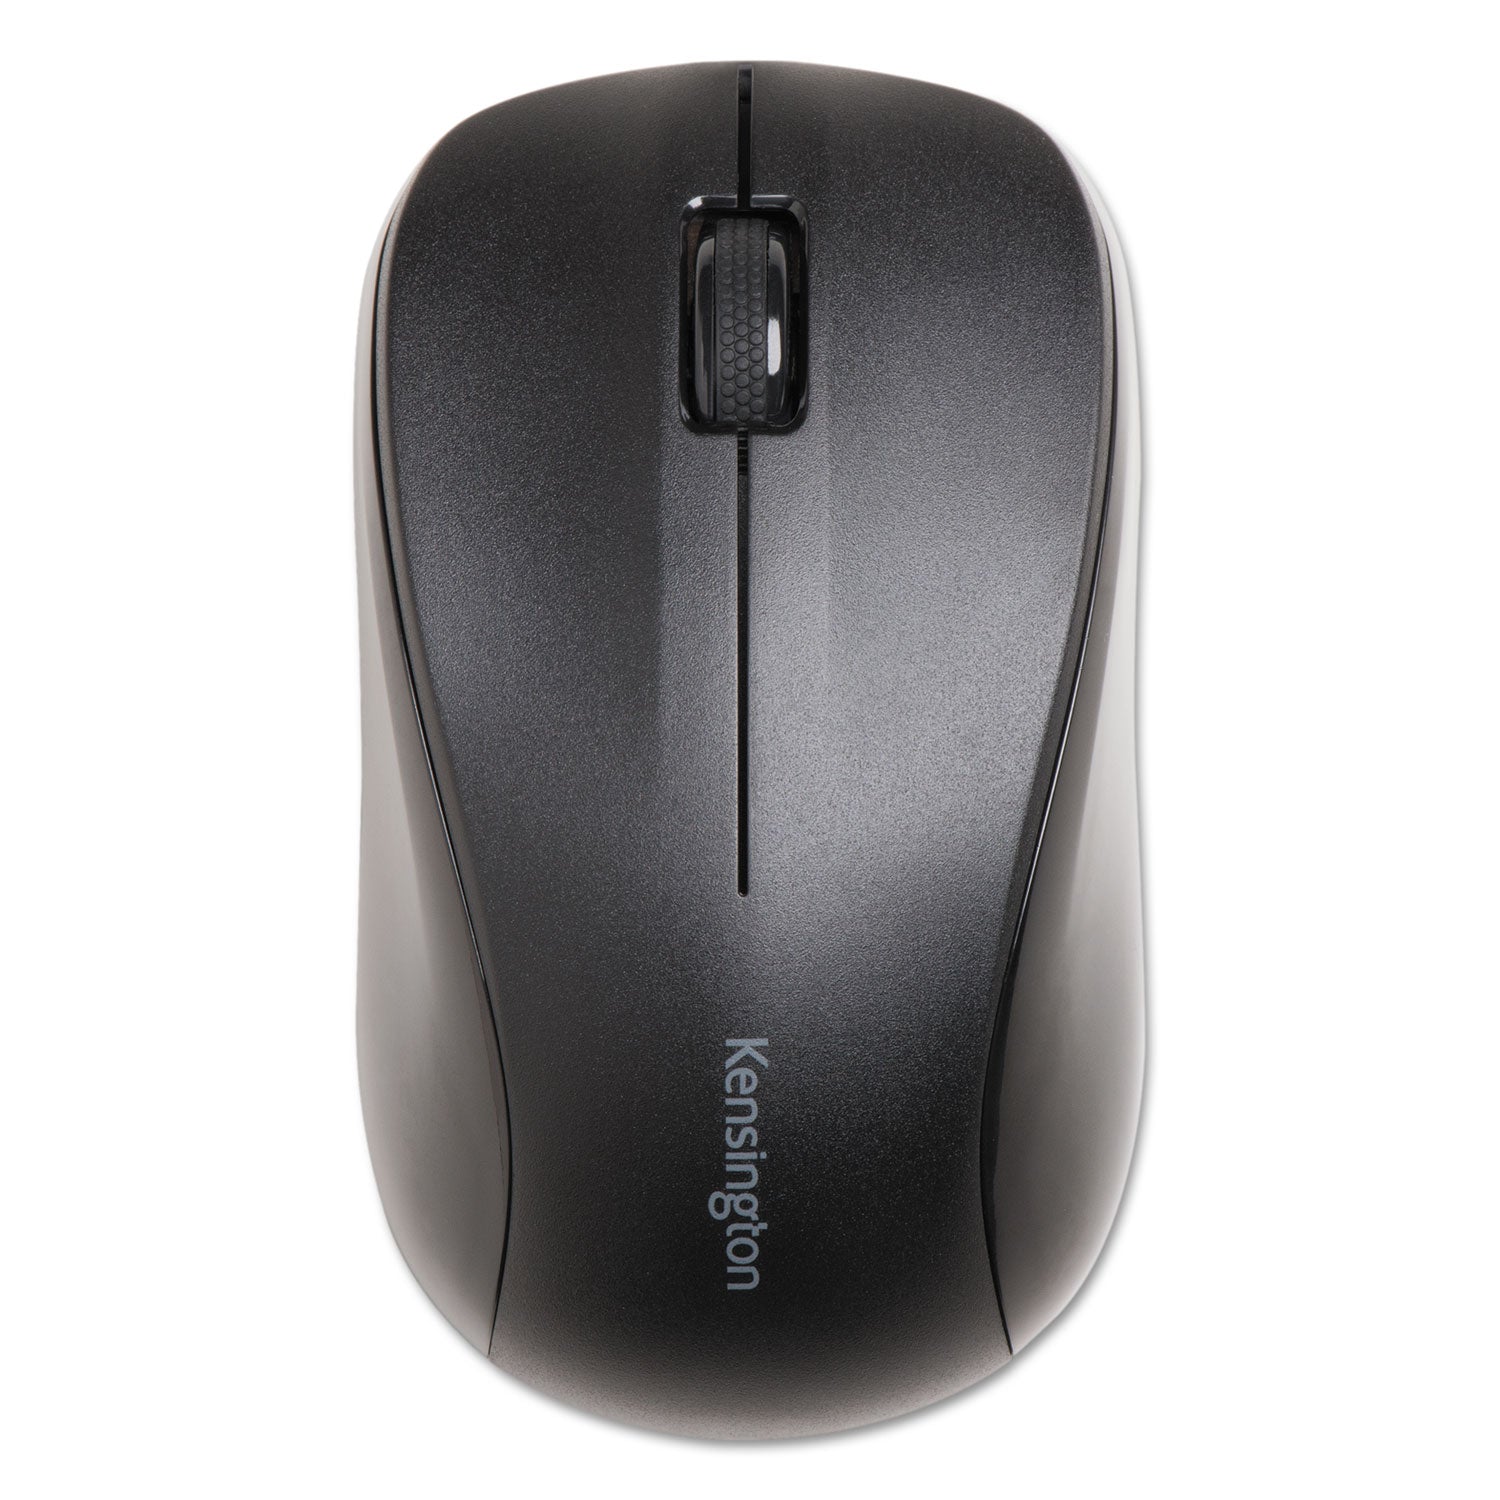 Wireless Mouse for Life, 2.4 GHz Frequency/30 ft Wireless Range, Left/Right Hand Use, Black - 1